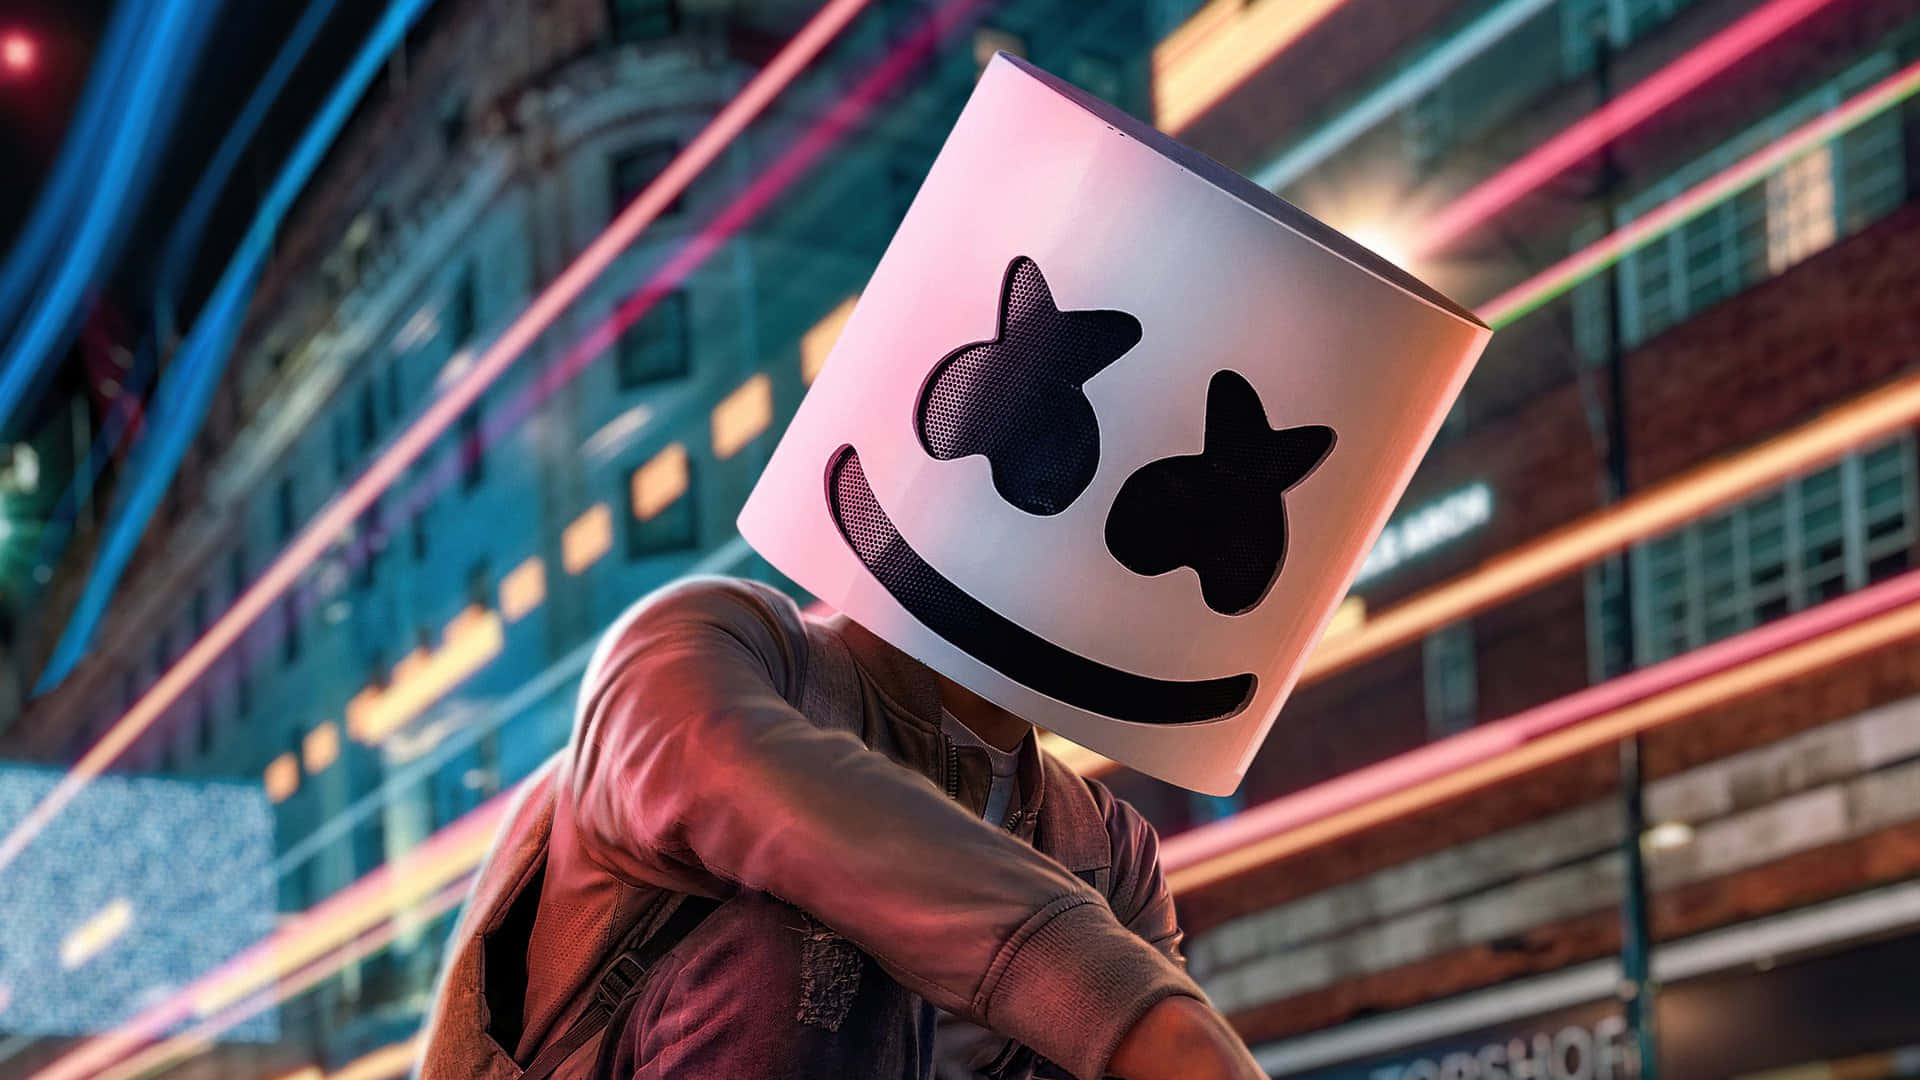 Marshmello performing in front of a packed crowd